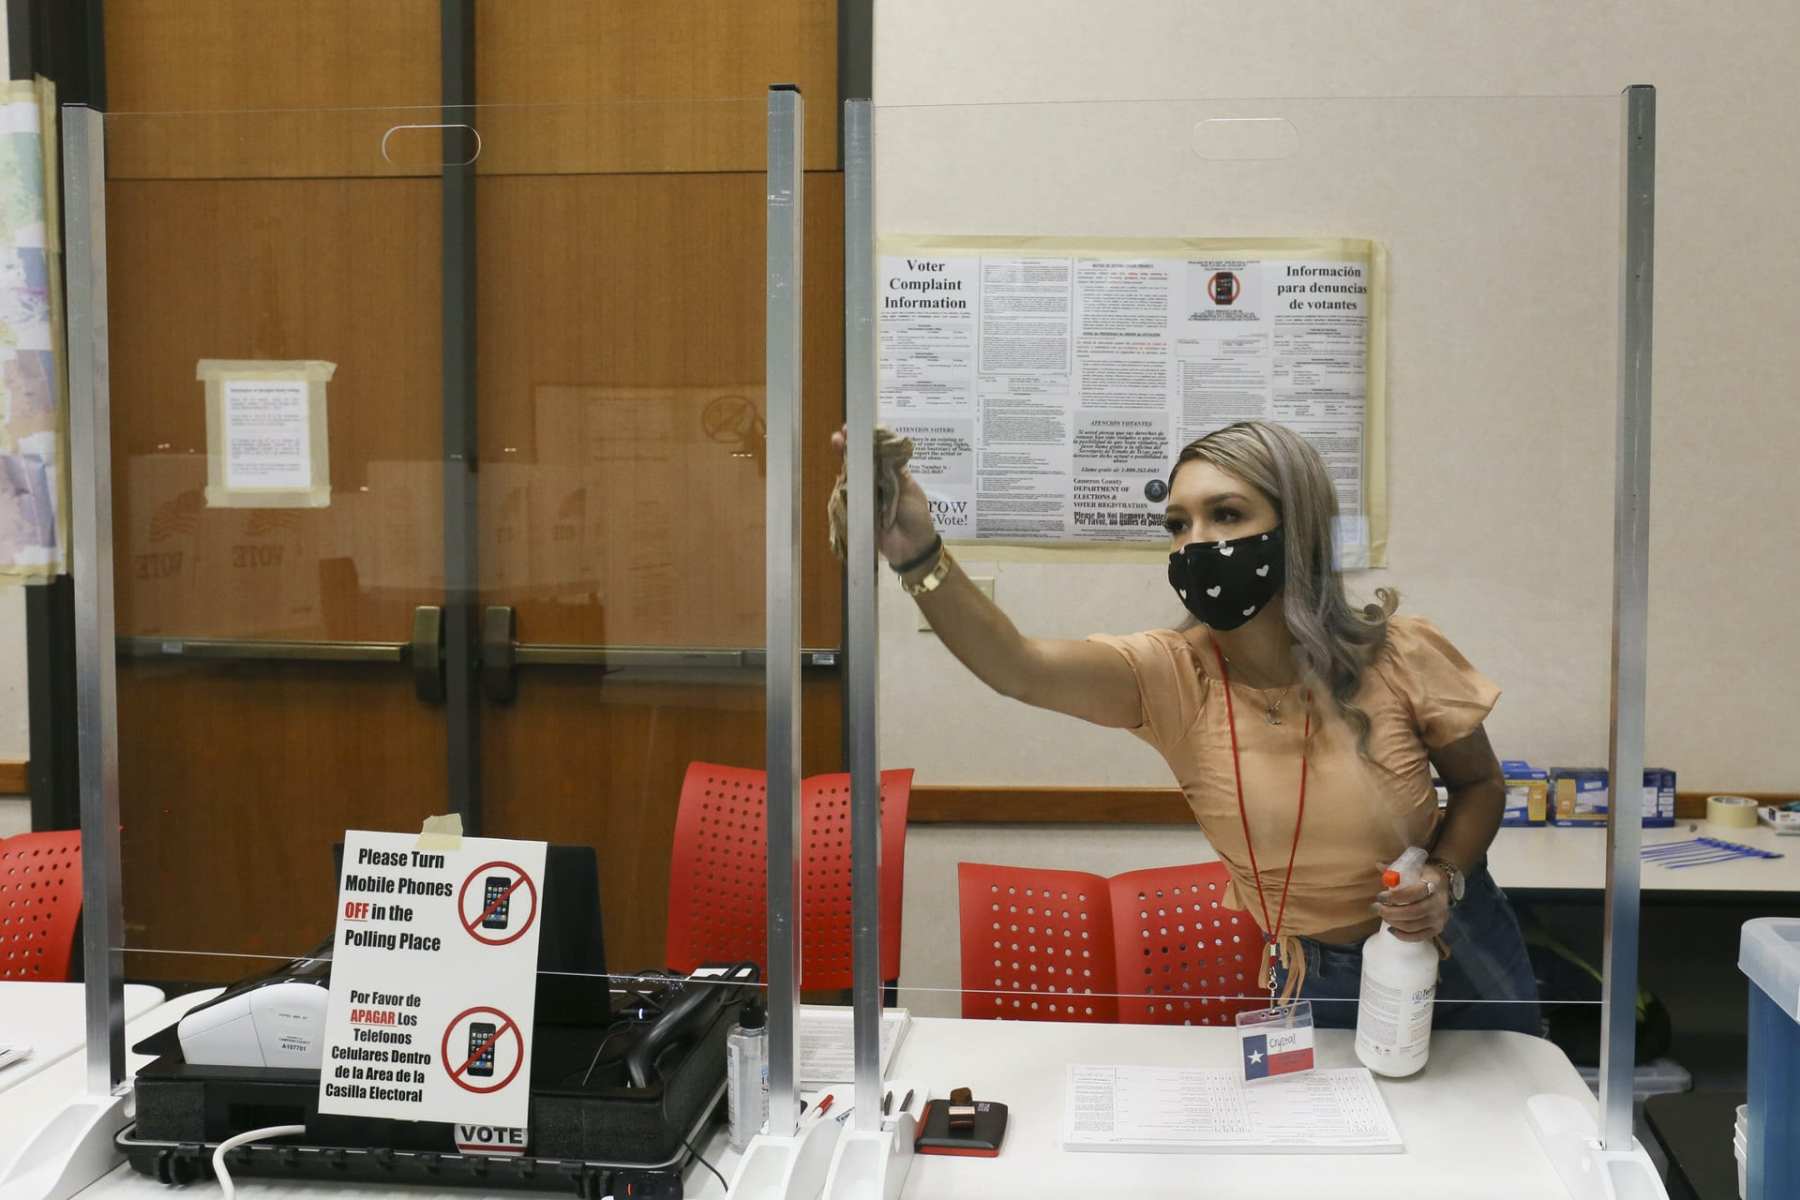 A poll worker cleans a plexiglass barrier at a Texas polling place.